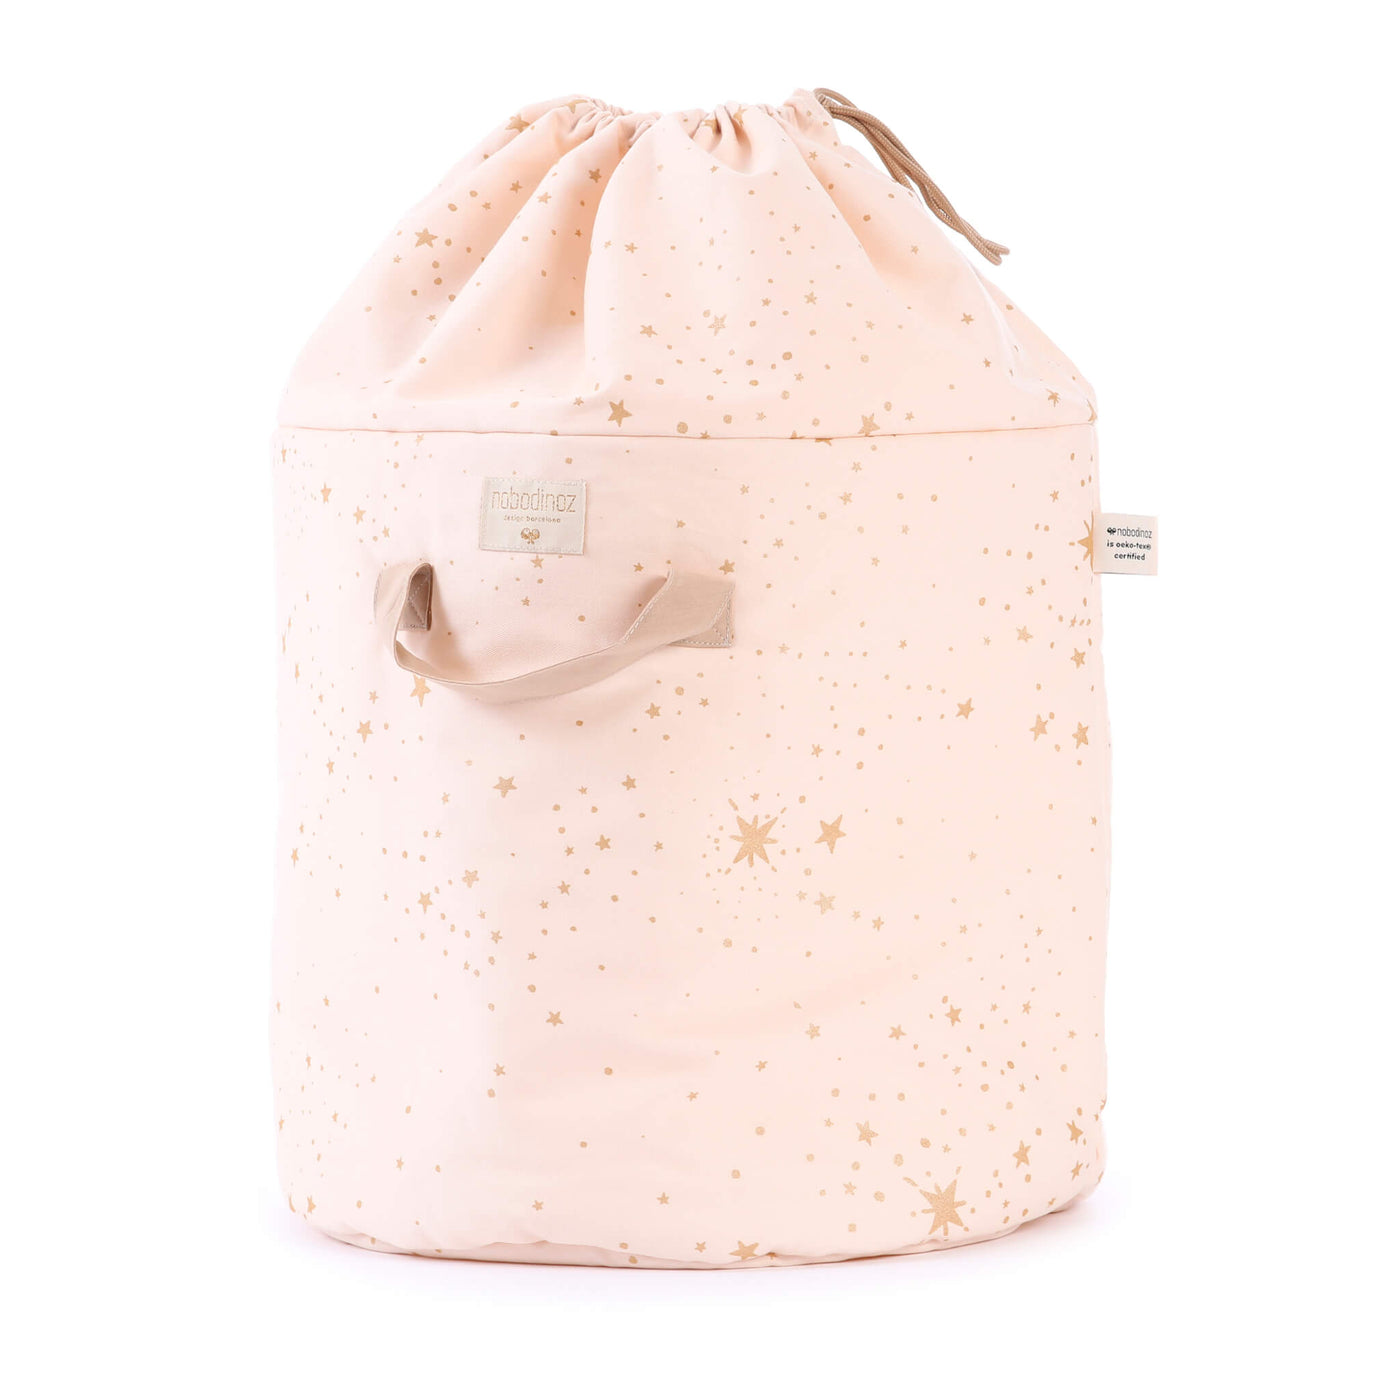 Nobodinoz Large Bamboo Toy Bag in Gold Stella/ Dream Pink